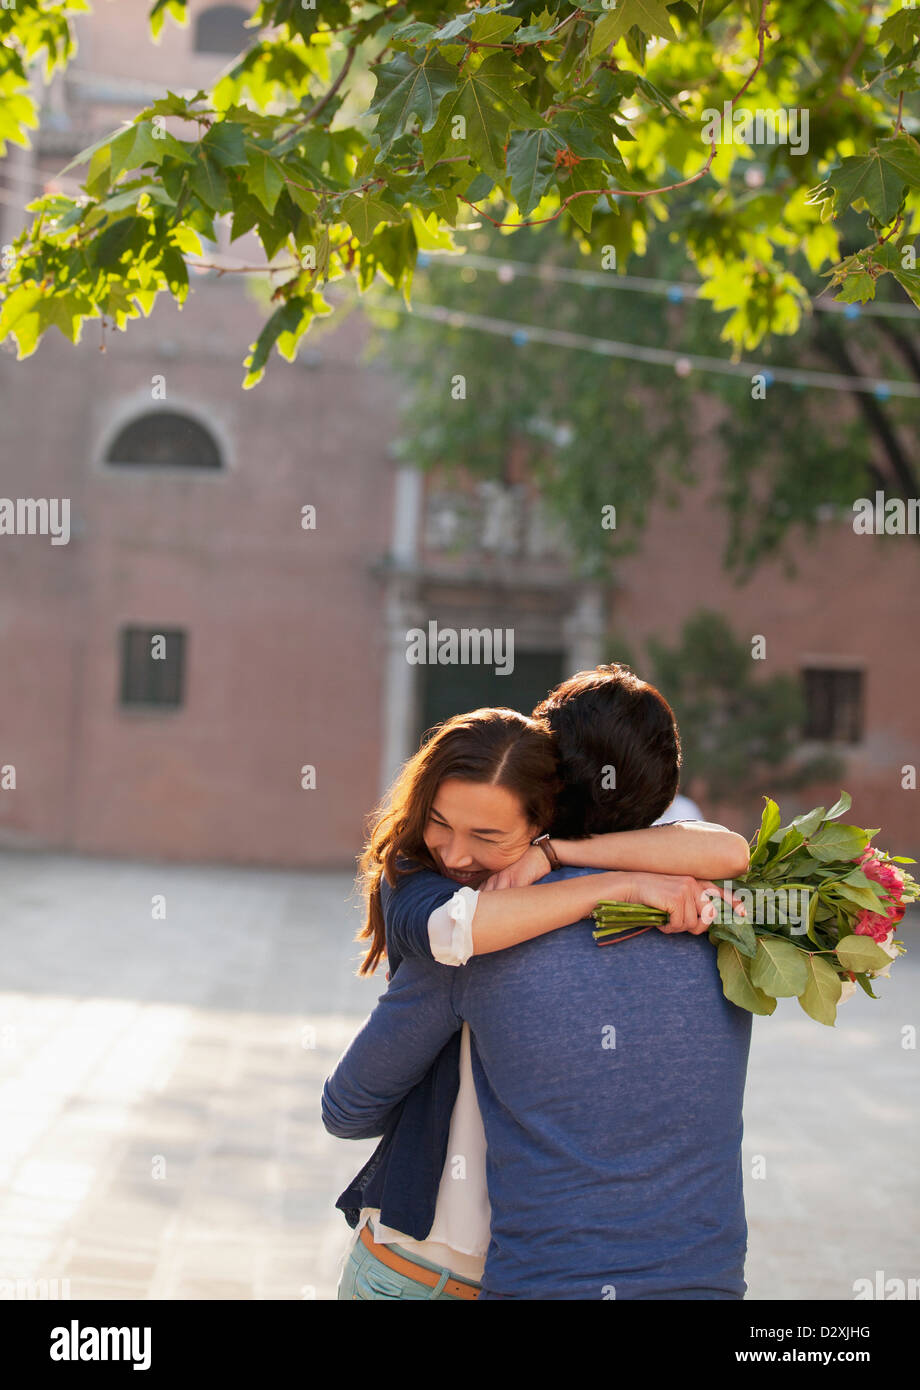 Woman holding flowers and hugging man Stock Photo